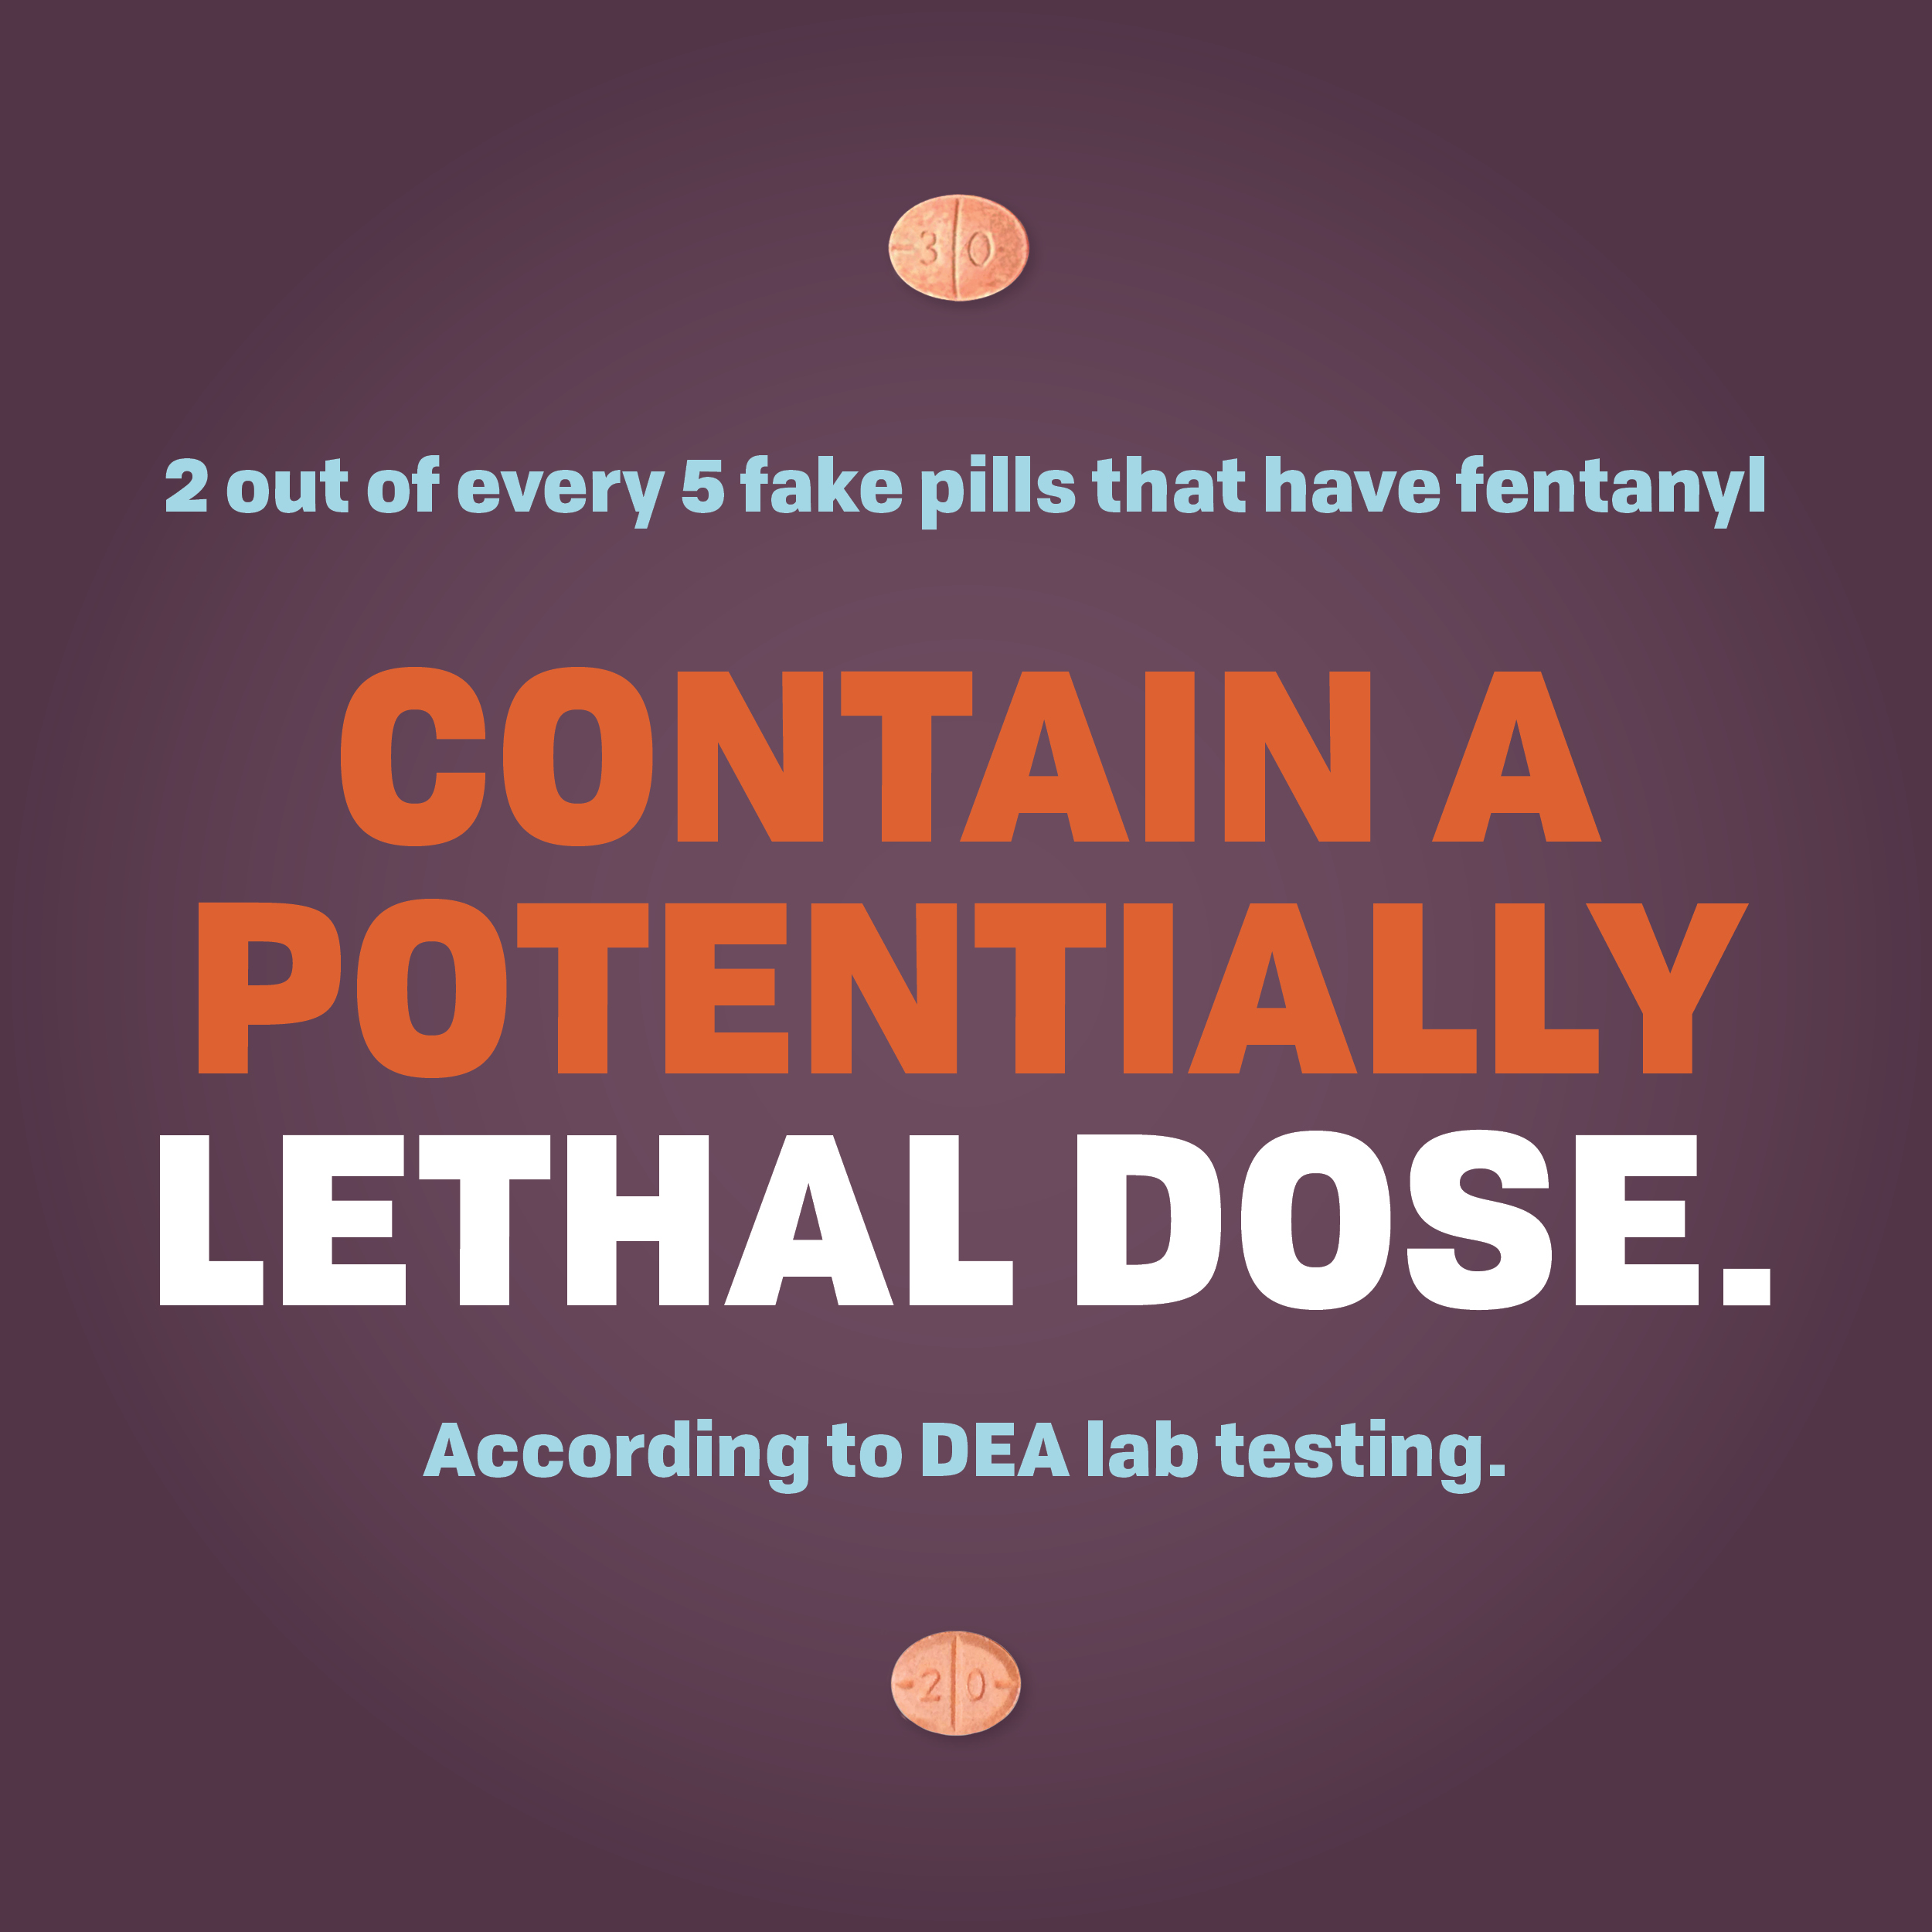 2 out of every 5 fake pills that have fentanyl contain a potentially lethal dose.